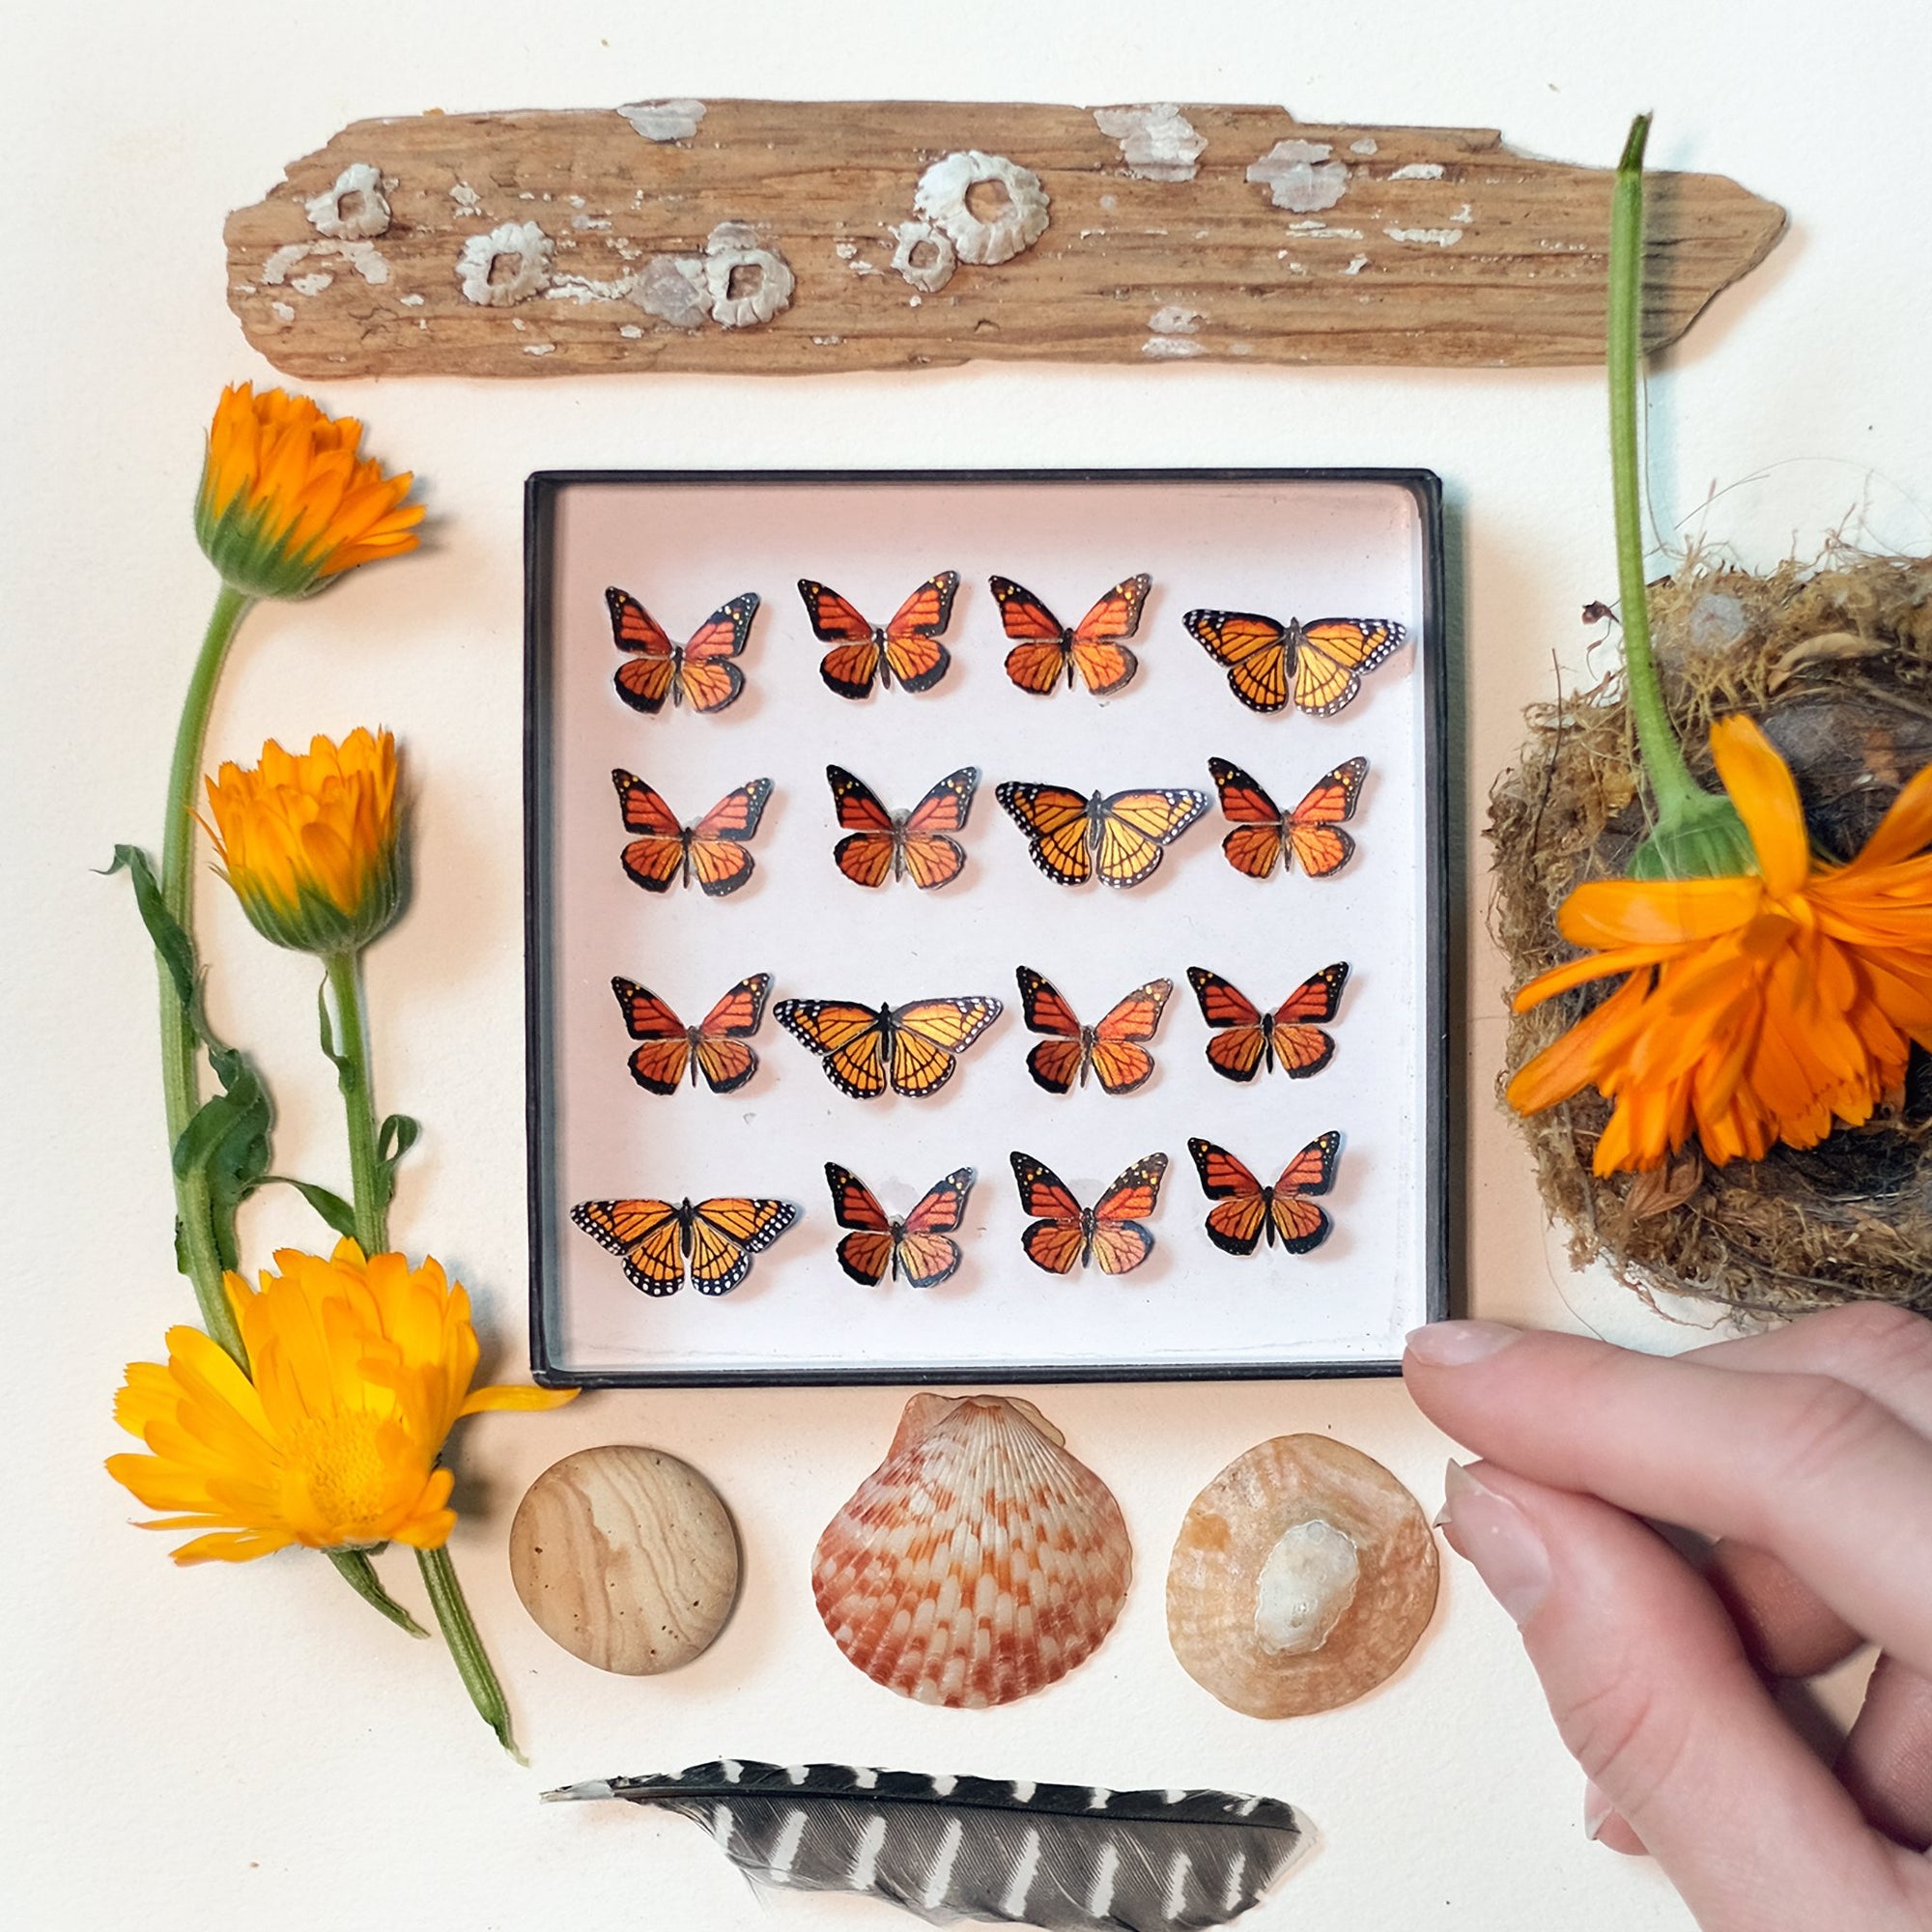 'Marmalade' Micro Monarch Butterfly Collection Artist Wholesale